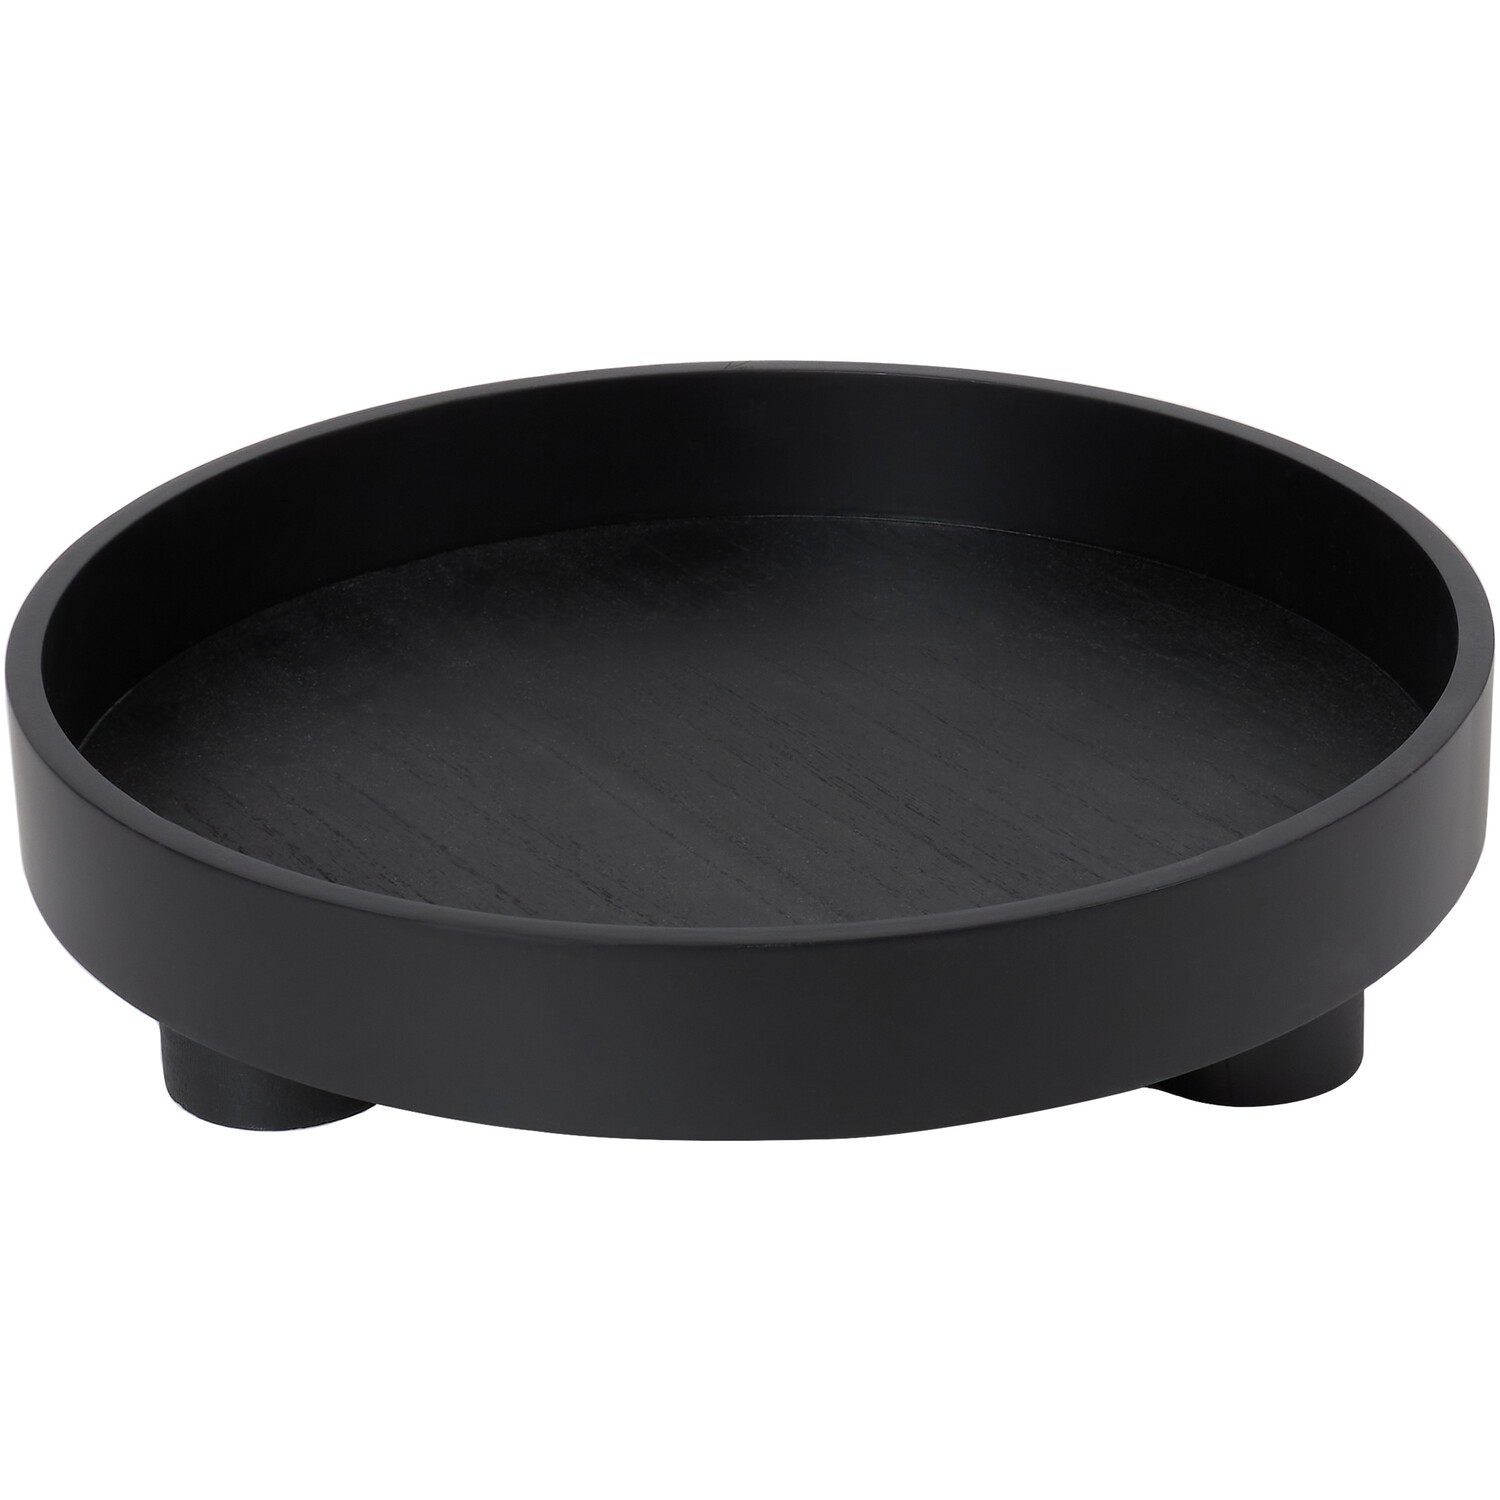 Footed Tray - Black Image 2